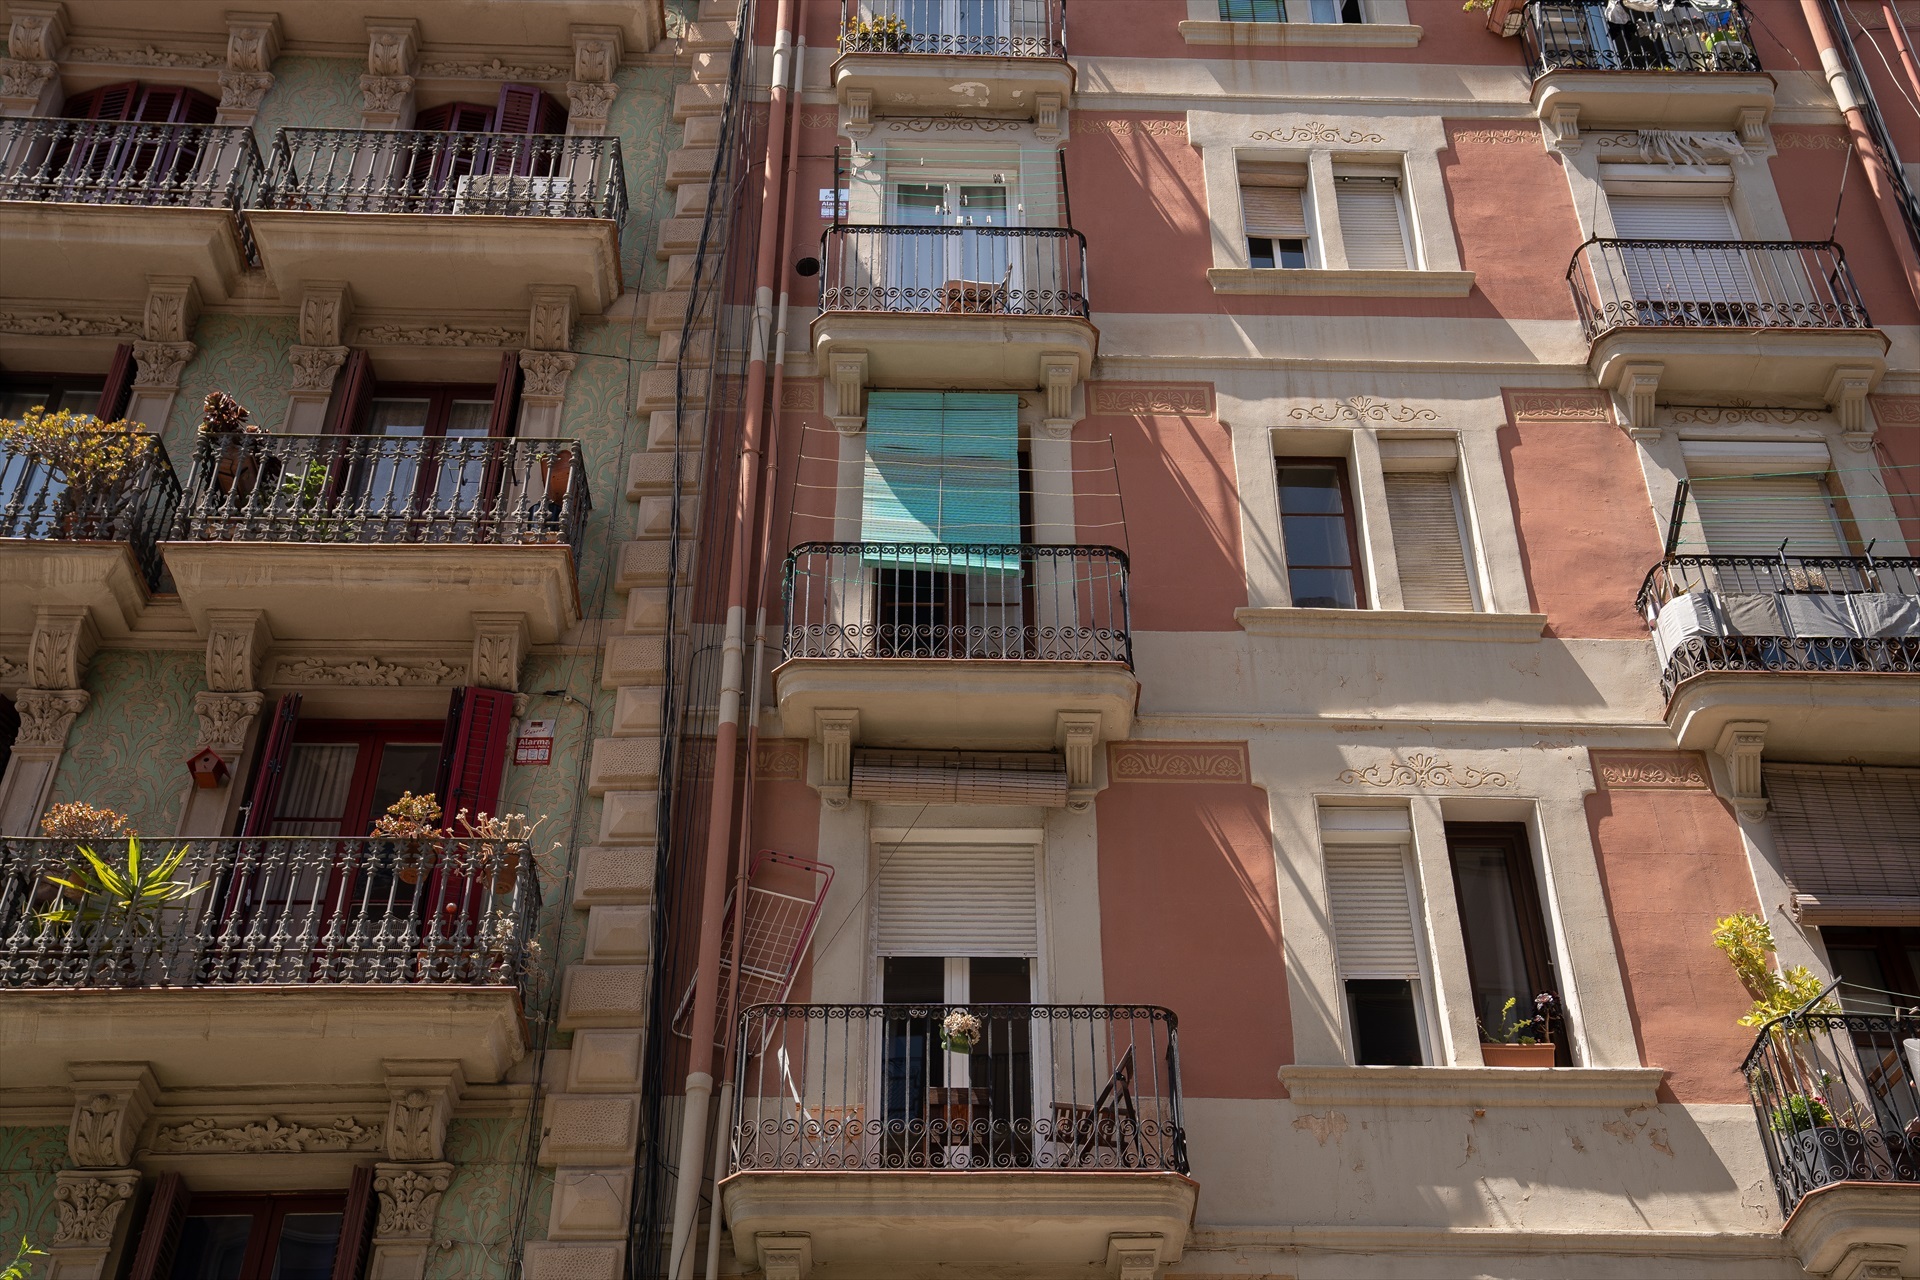 The 140 Catalan municipalities where housing rental prices will be capped